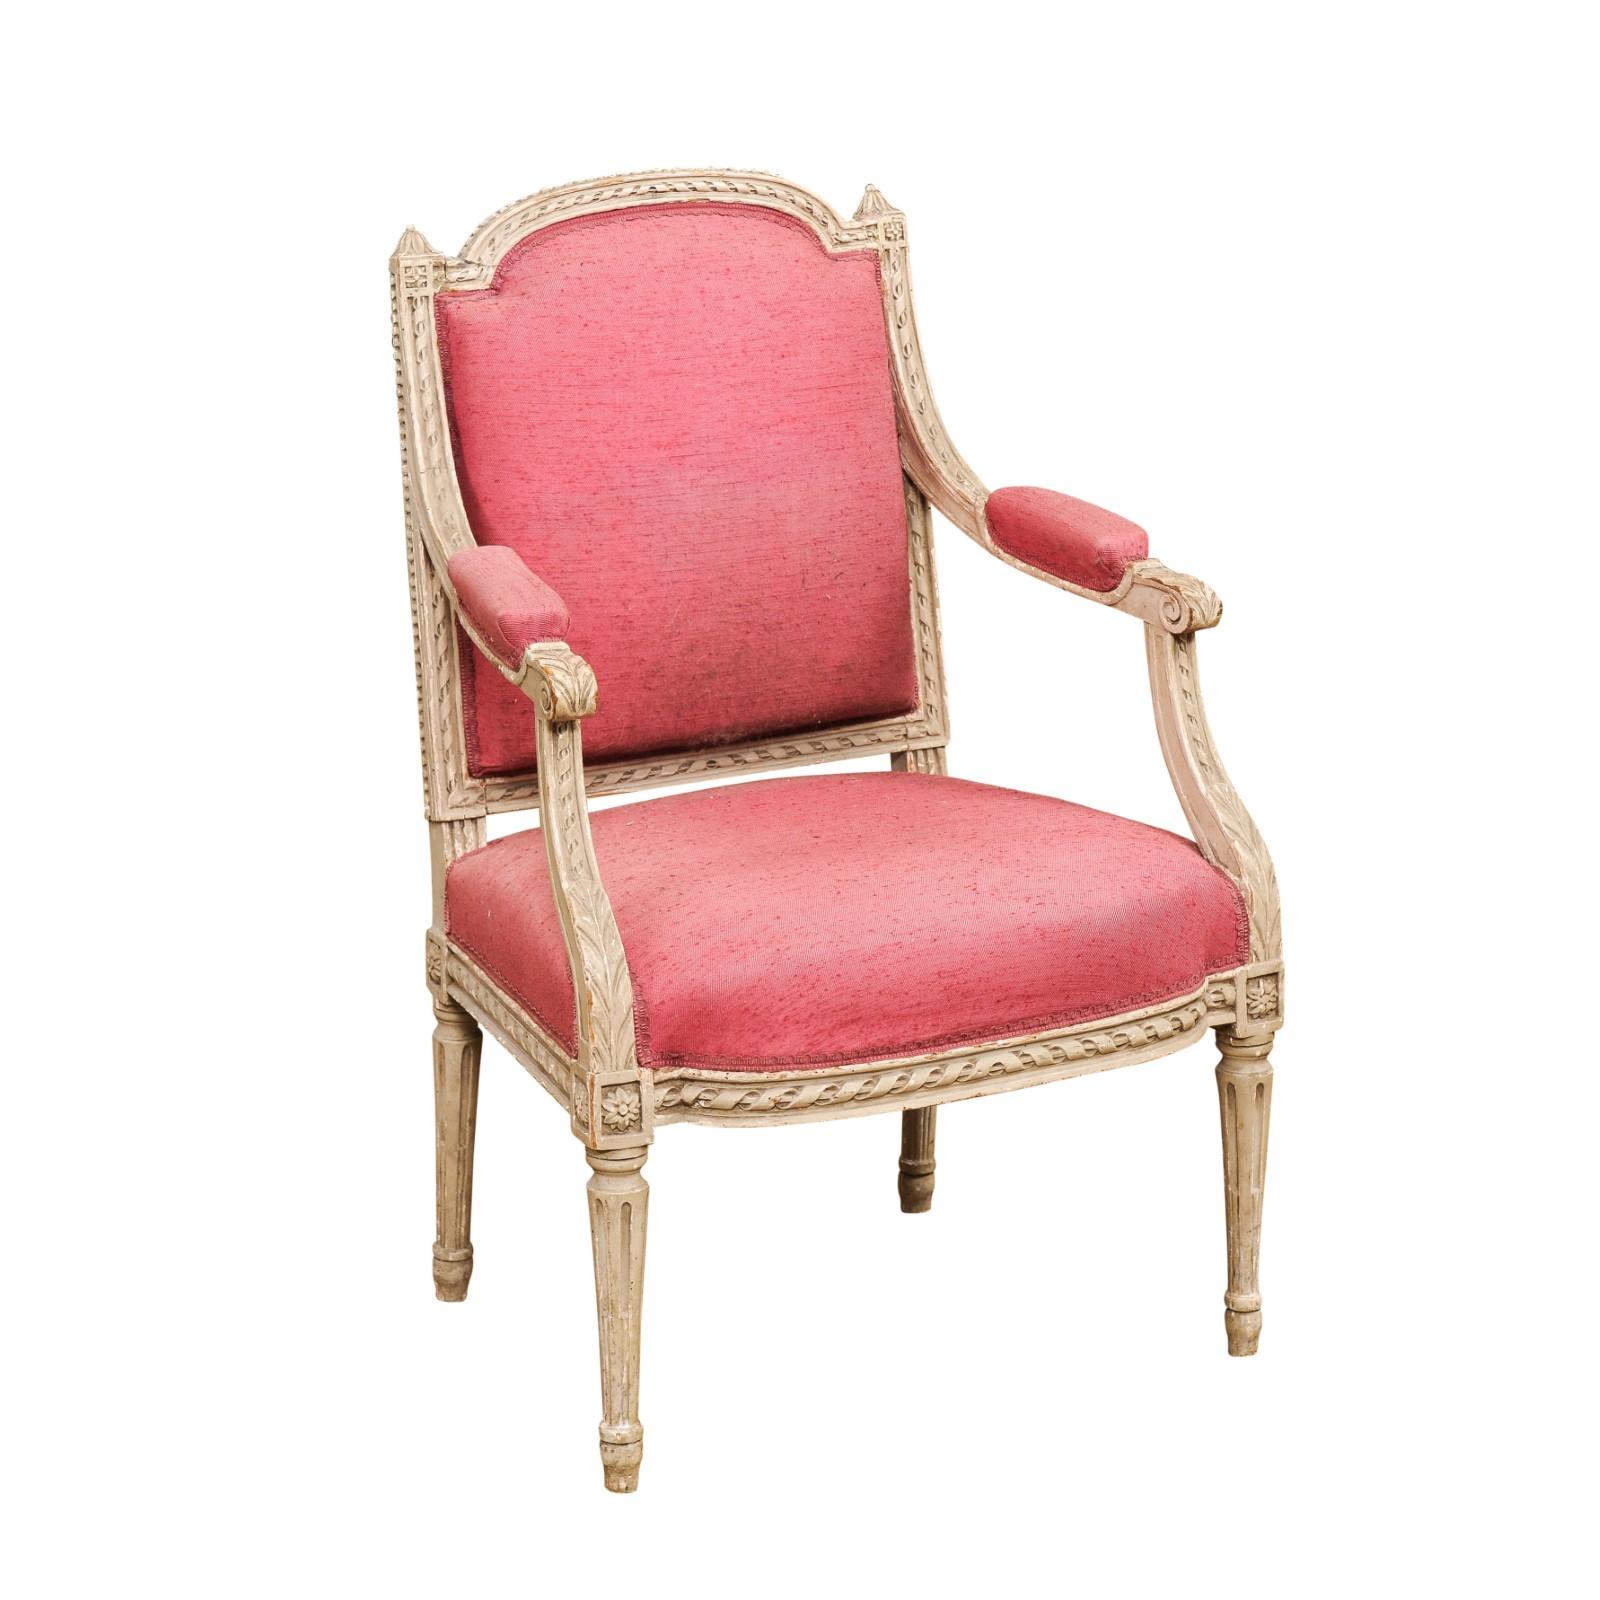 A French Louis XVI style painted wood armchair from the 19th century with carved décor including twisted rope motifs, acanthus leaves, rosettes and petite beads. Step into the era of French elegance with this 19th-century Louis XVI style painted